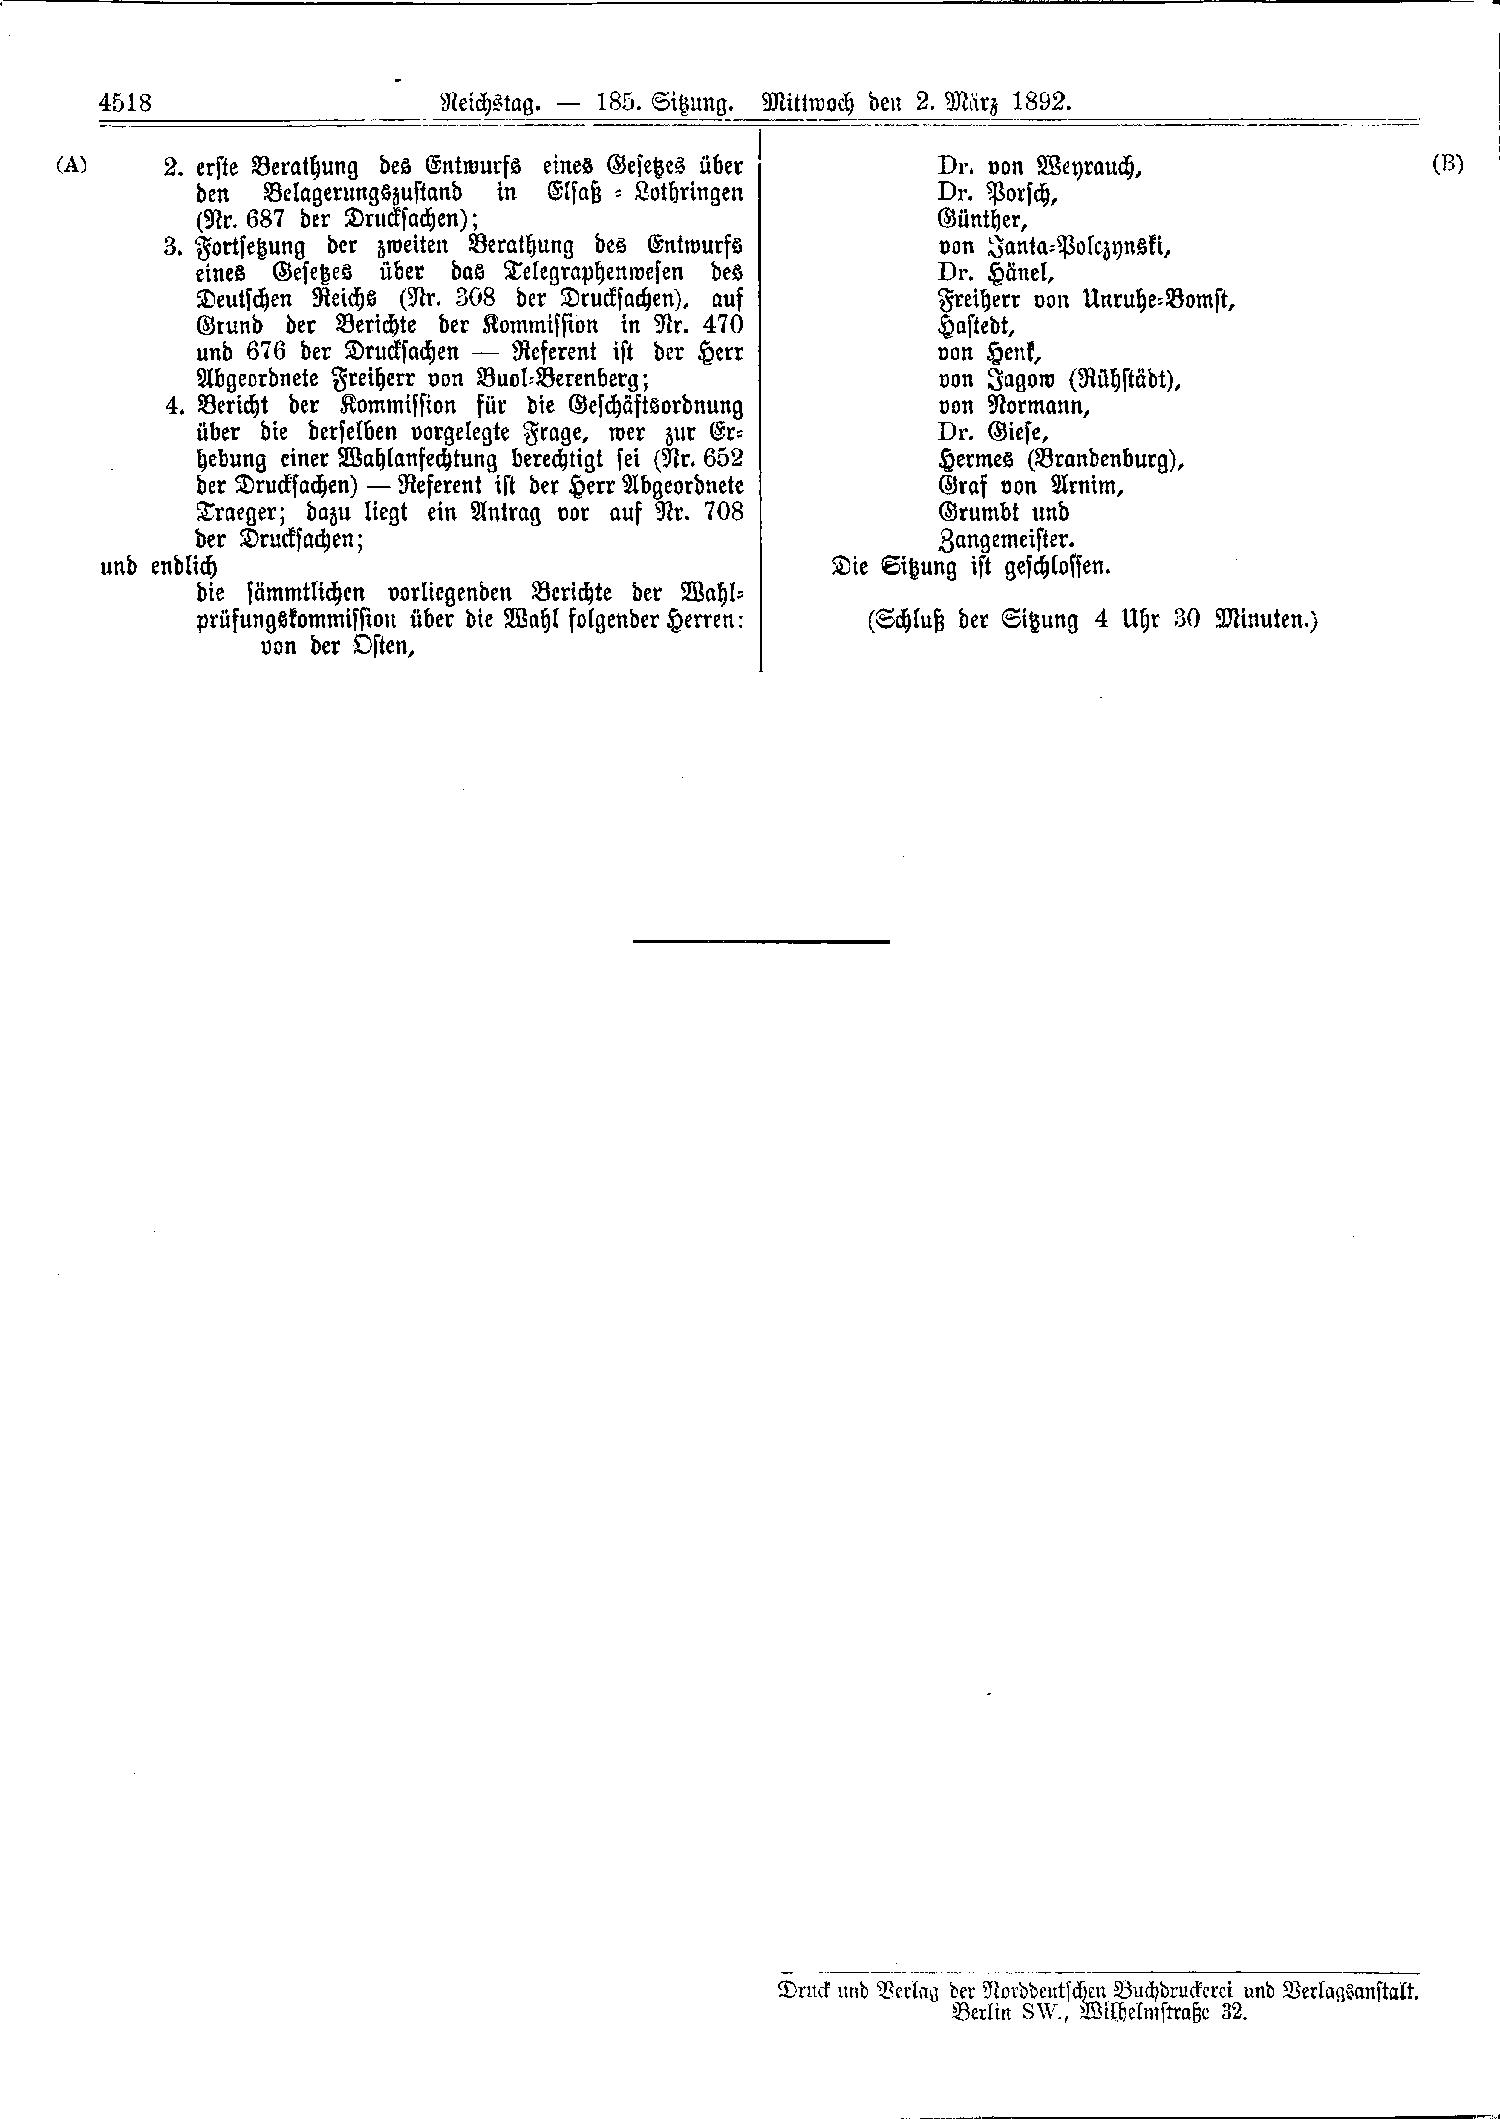 Scan of page 4518